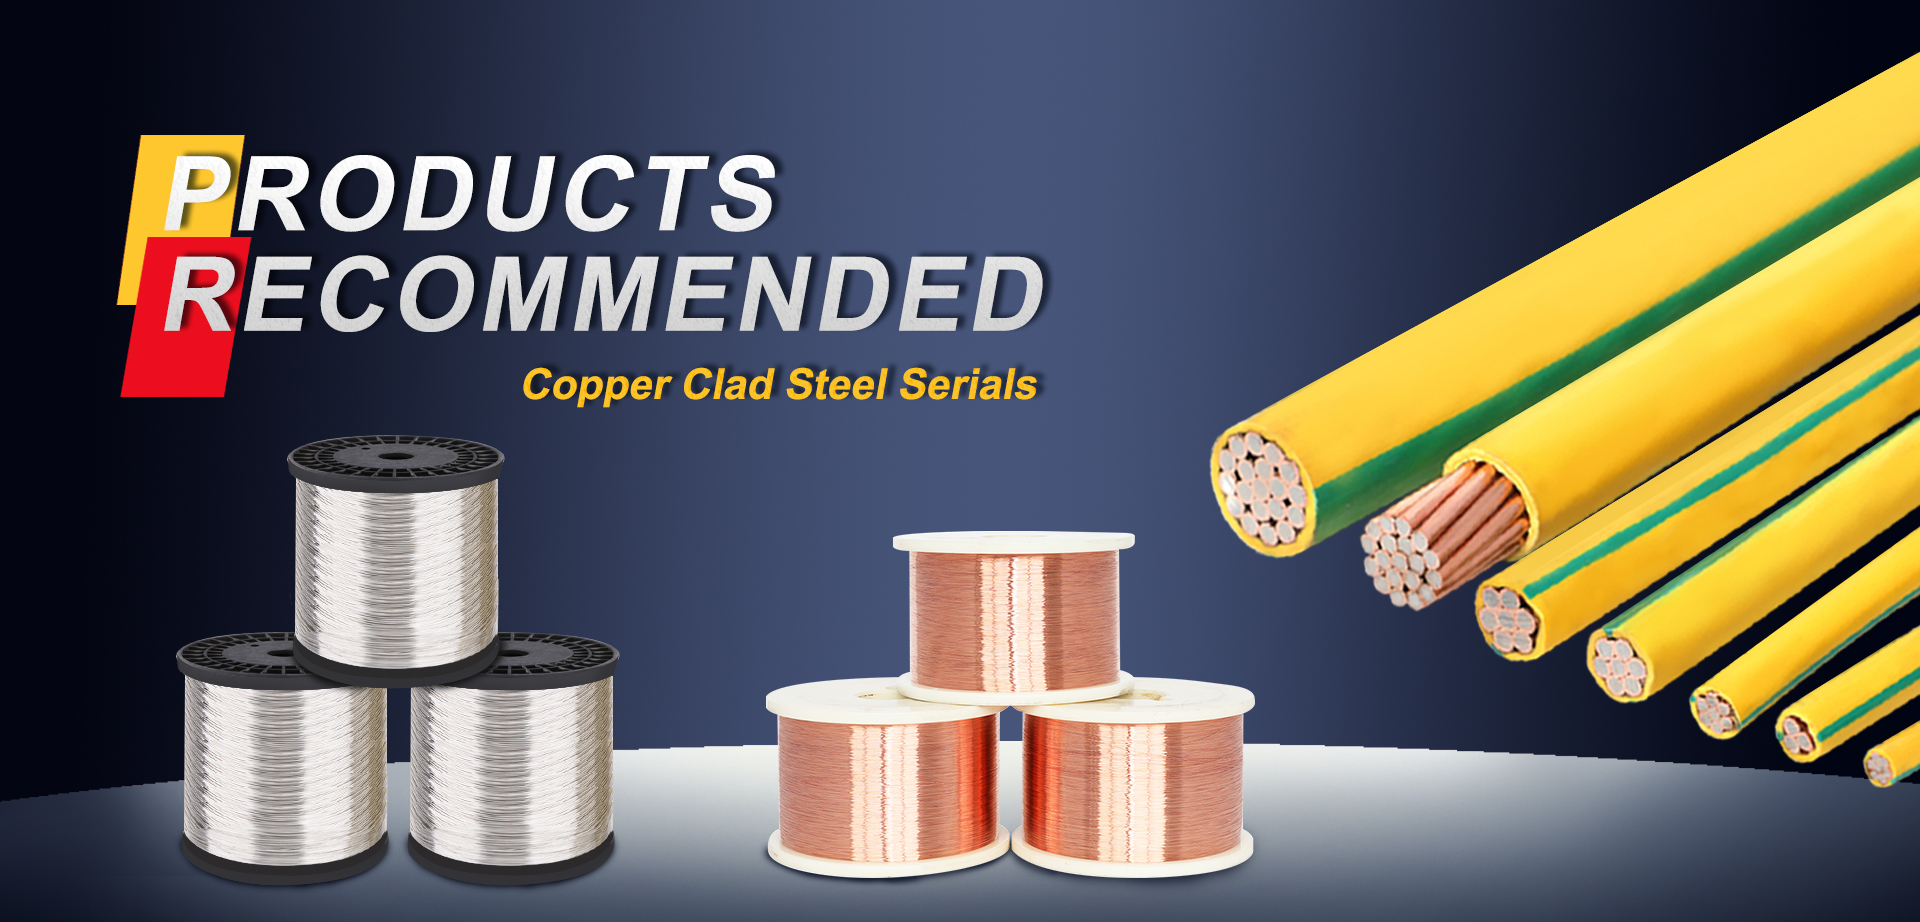 Expert Manufacturer of Cable Conductor Materials